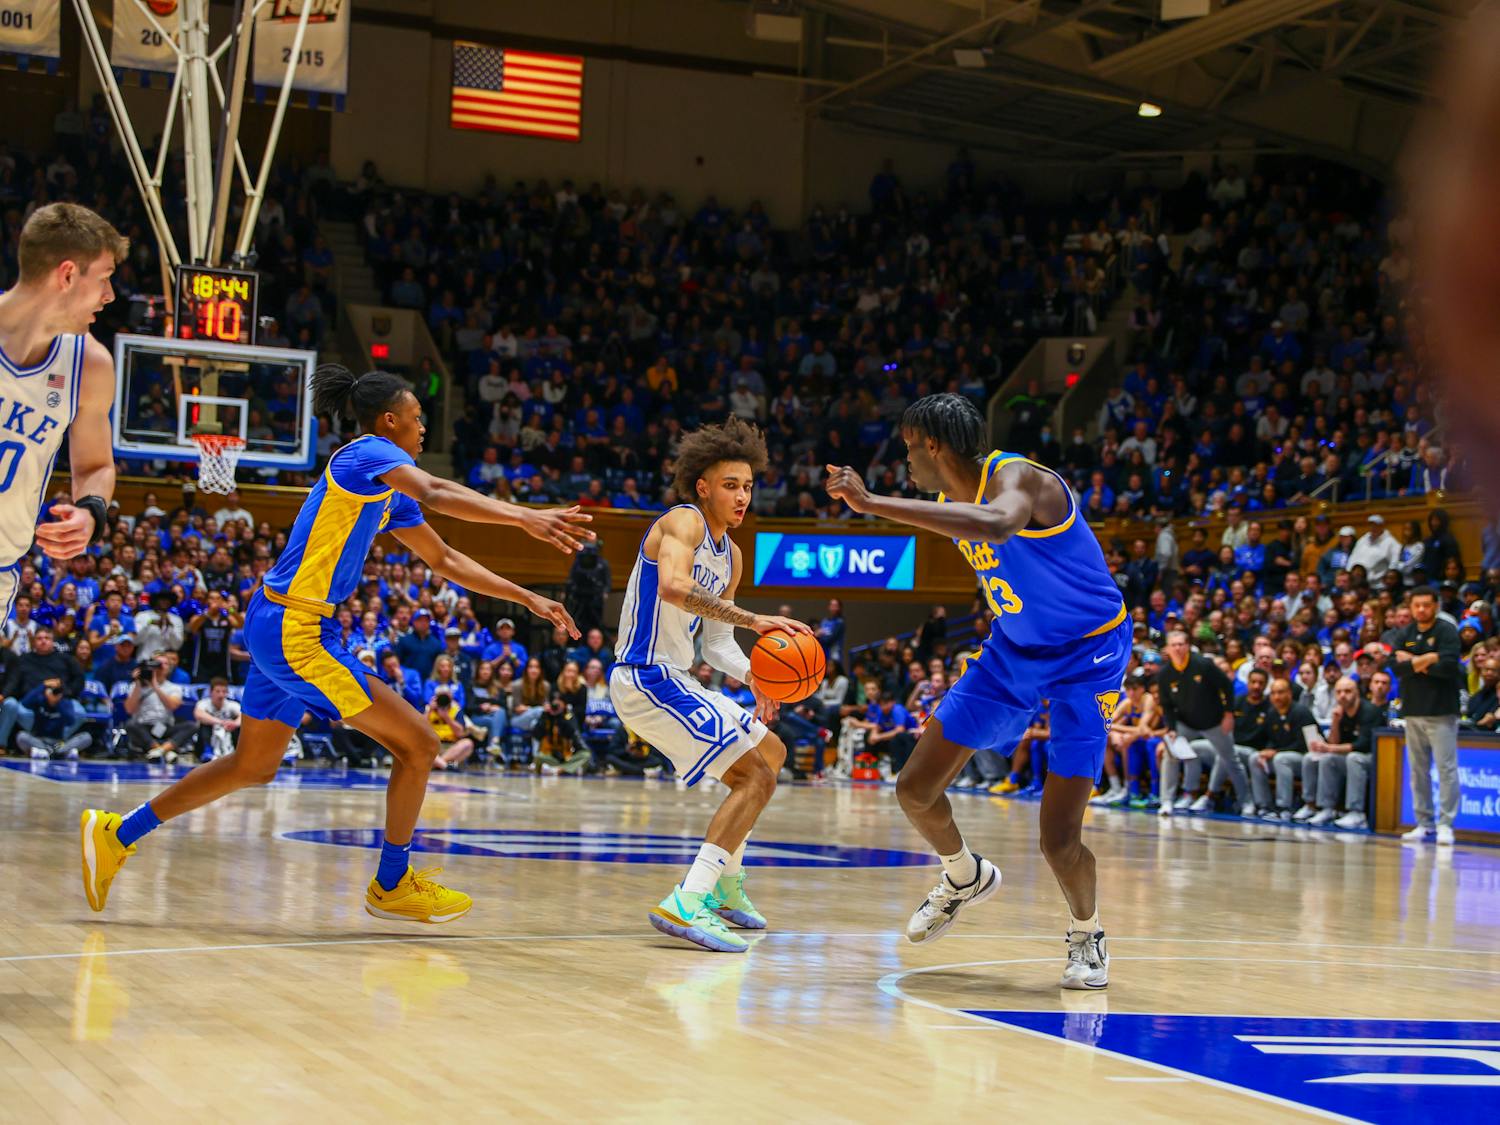 Sophomore guard Tyrese Proctor scored a career-high 24 points against Louisville Tuesday.